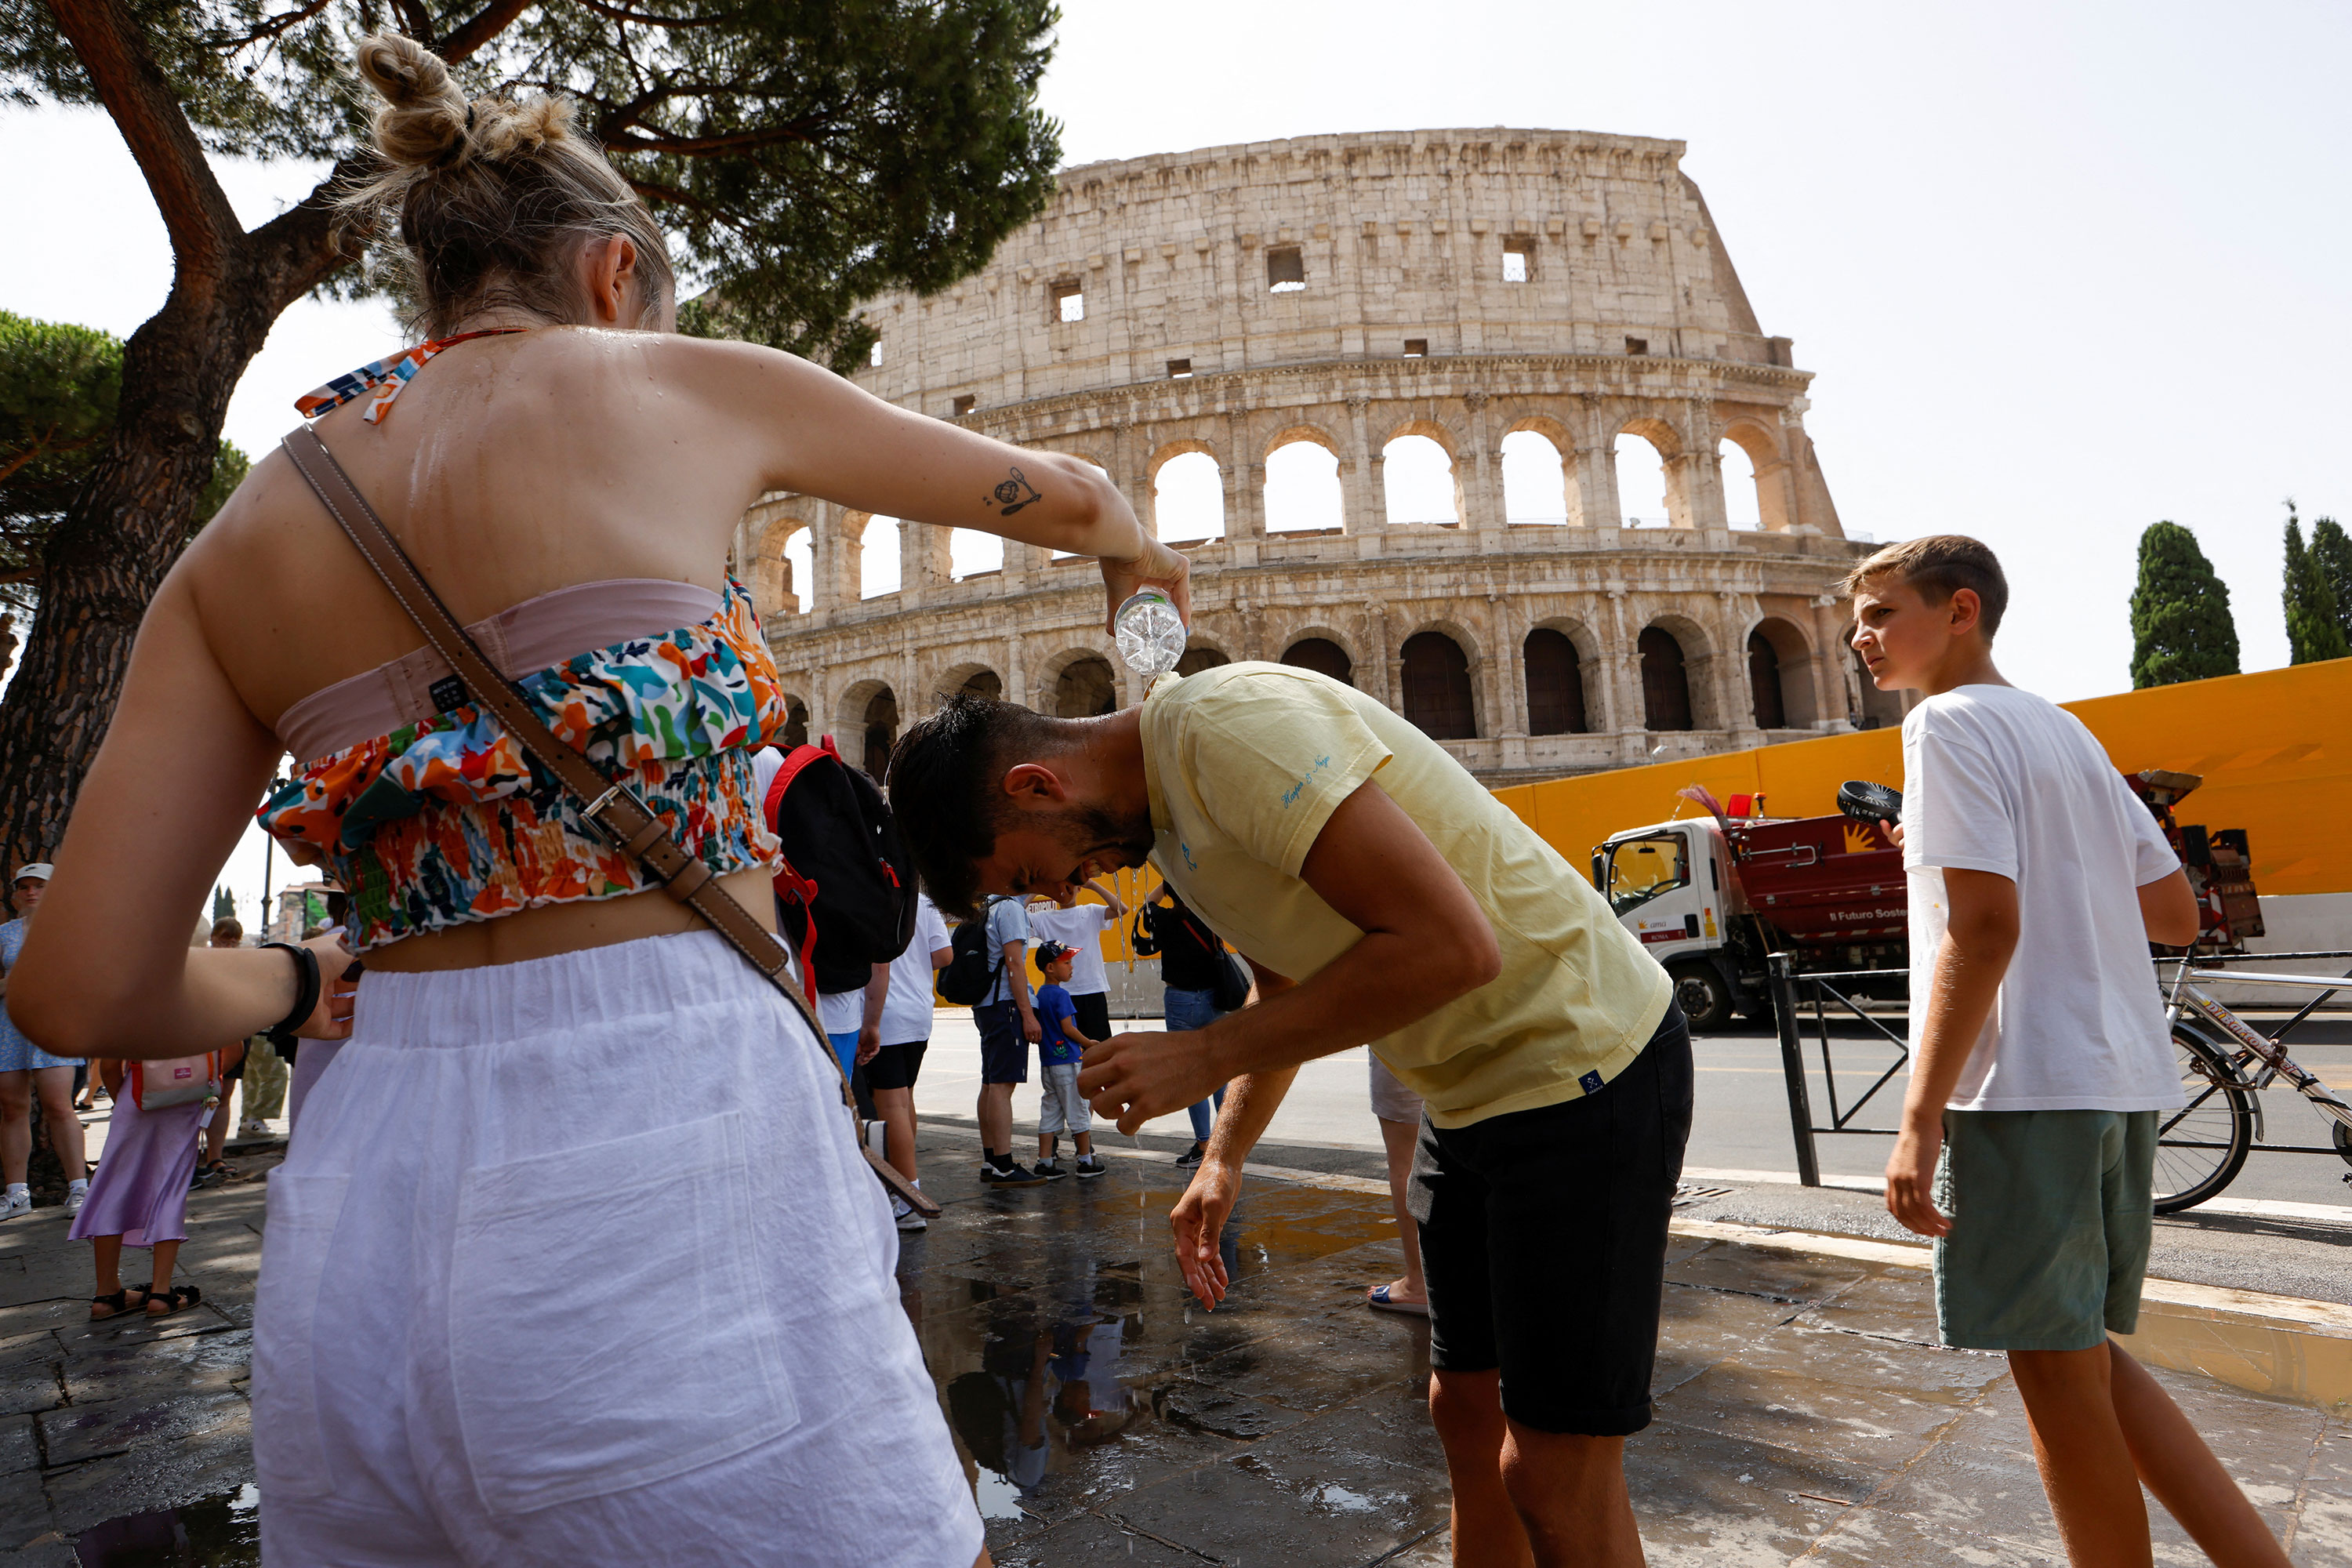 New record high temperature set in Rome, weather agency says